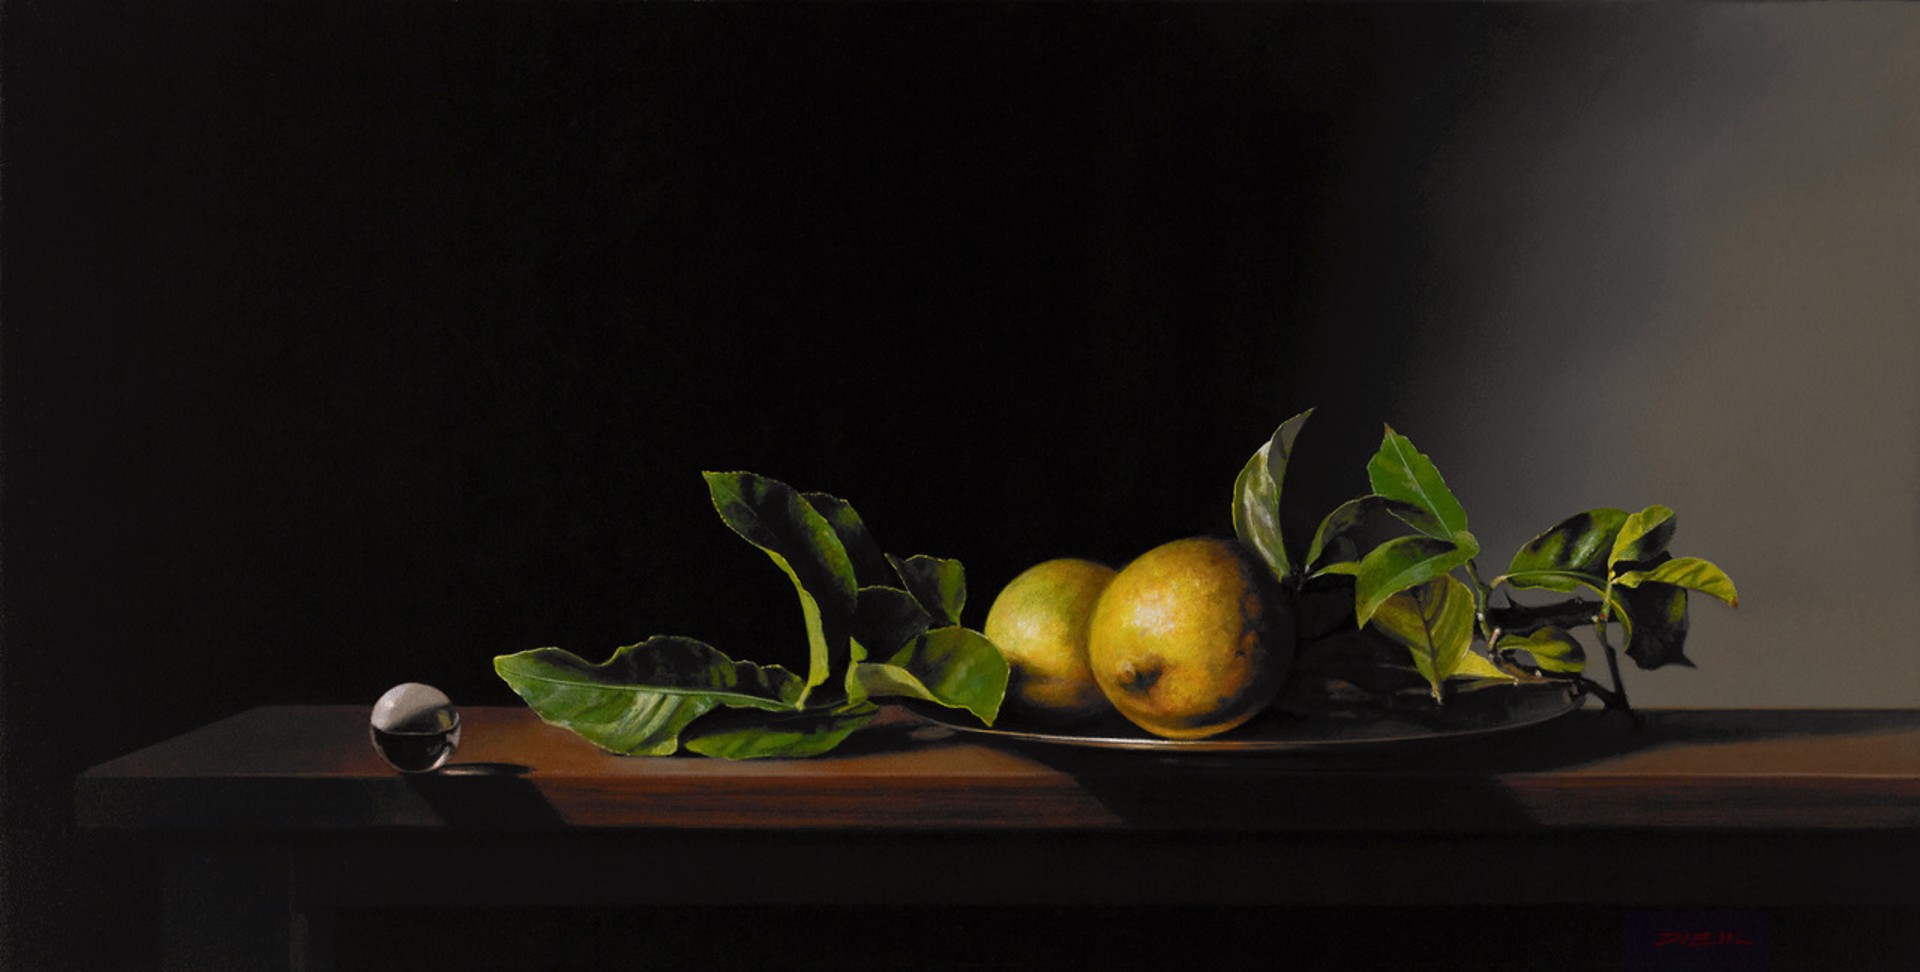 When Life Gives You Lemons by Guy Diehl